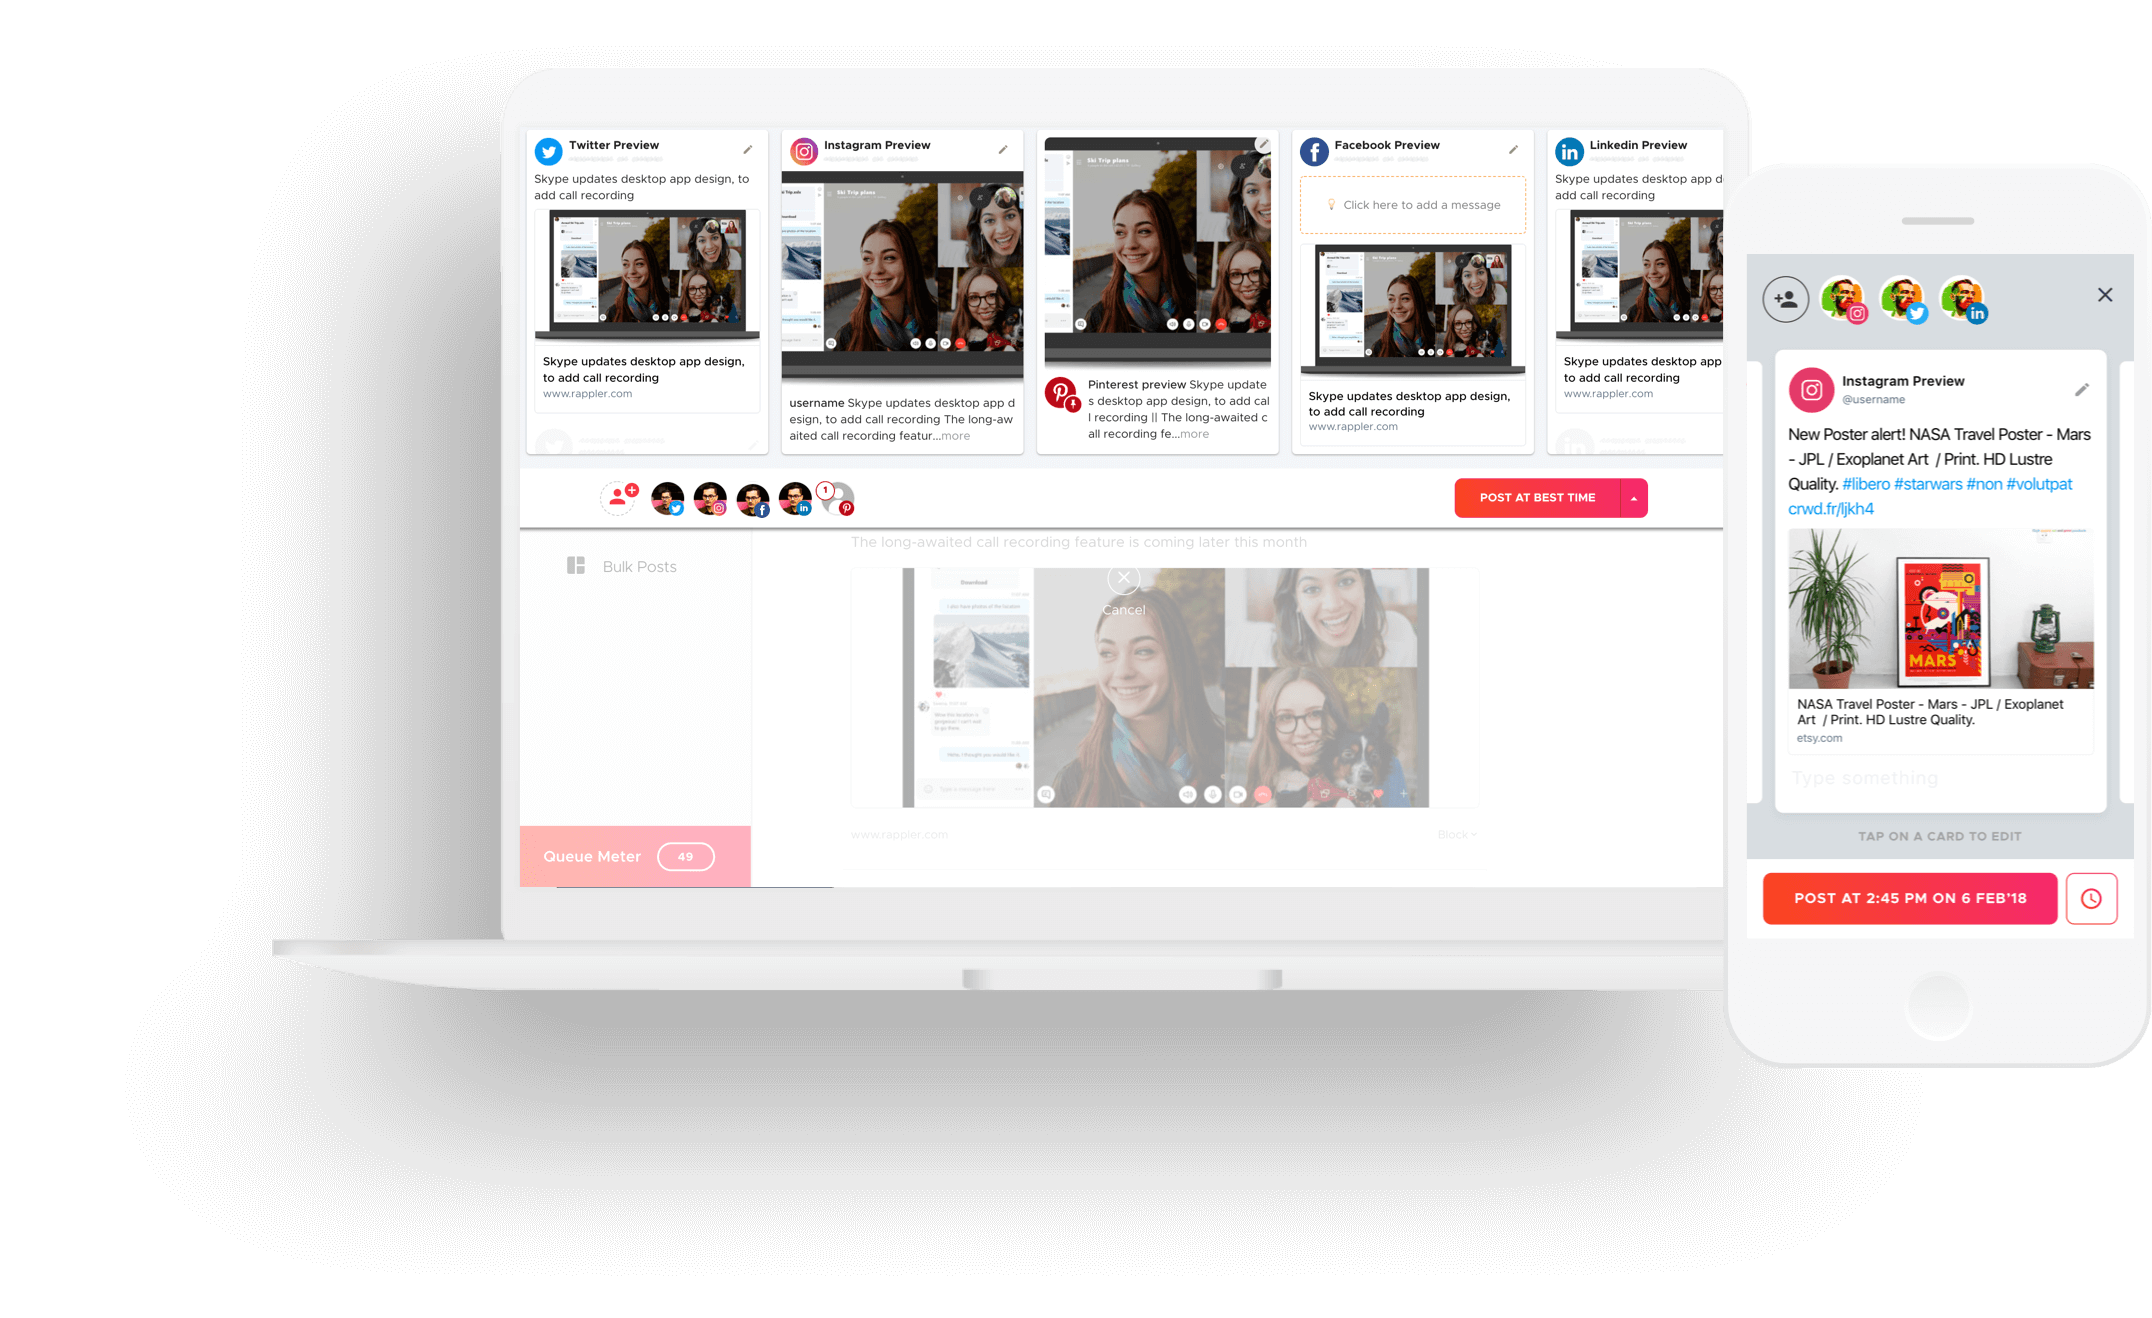 Crowdfire is a popular social media scheduling tool that helps plan posts in advance.